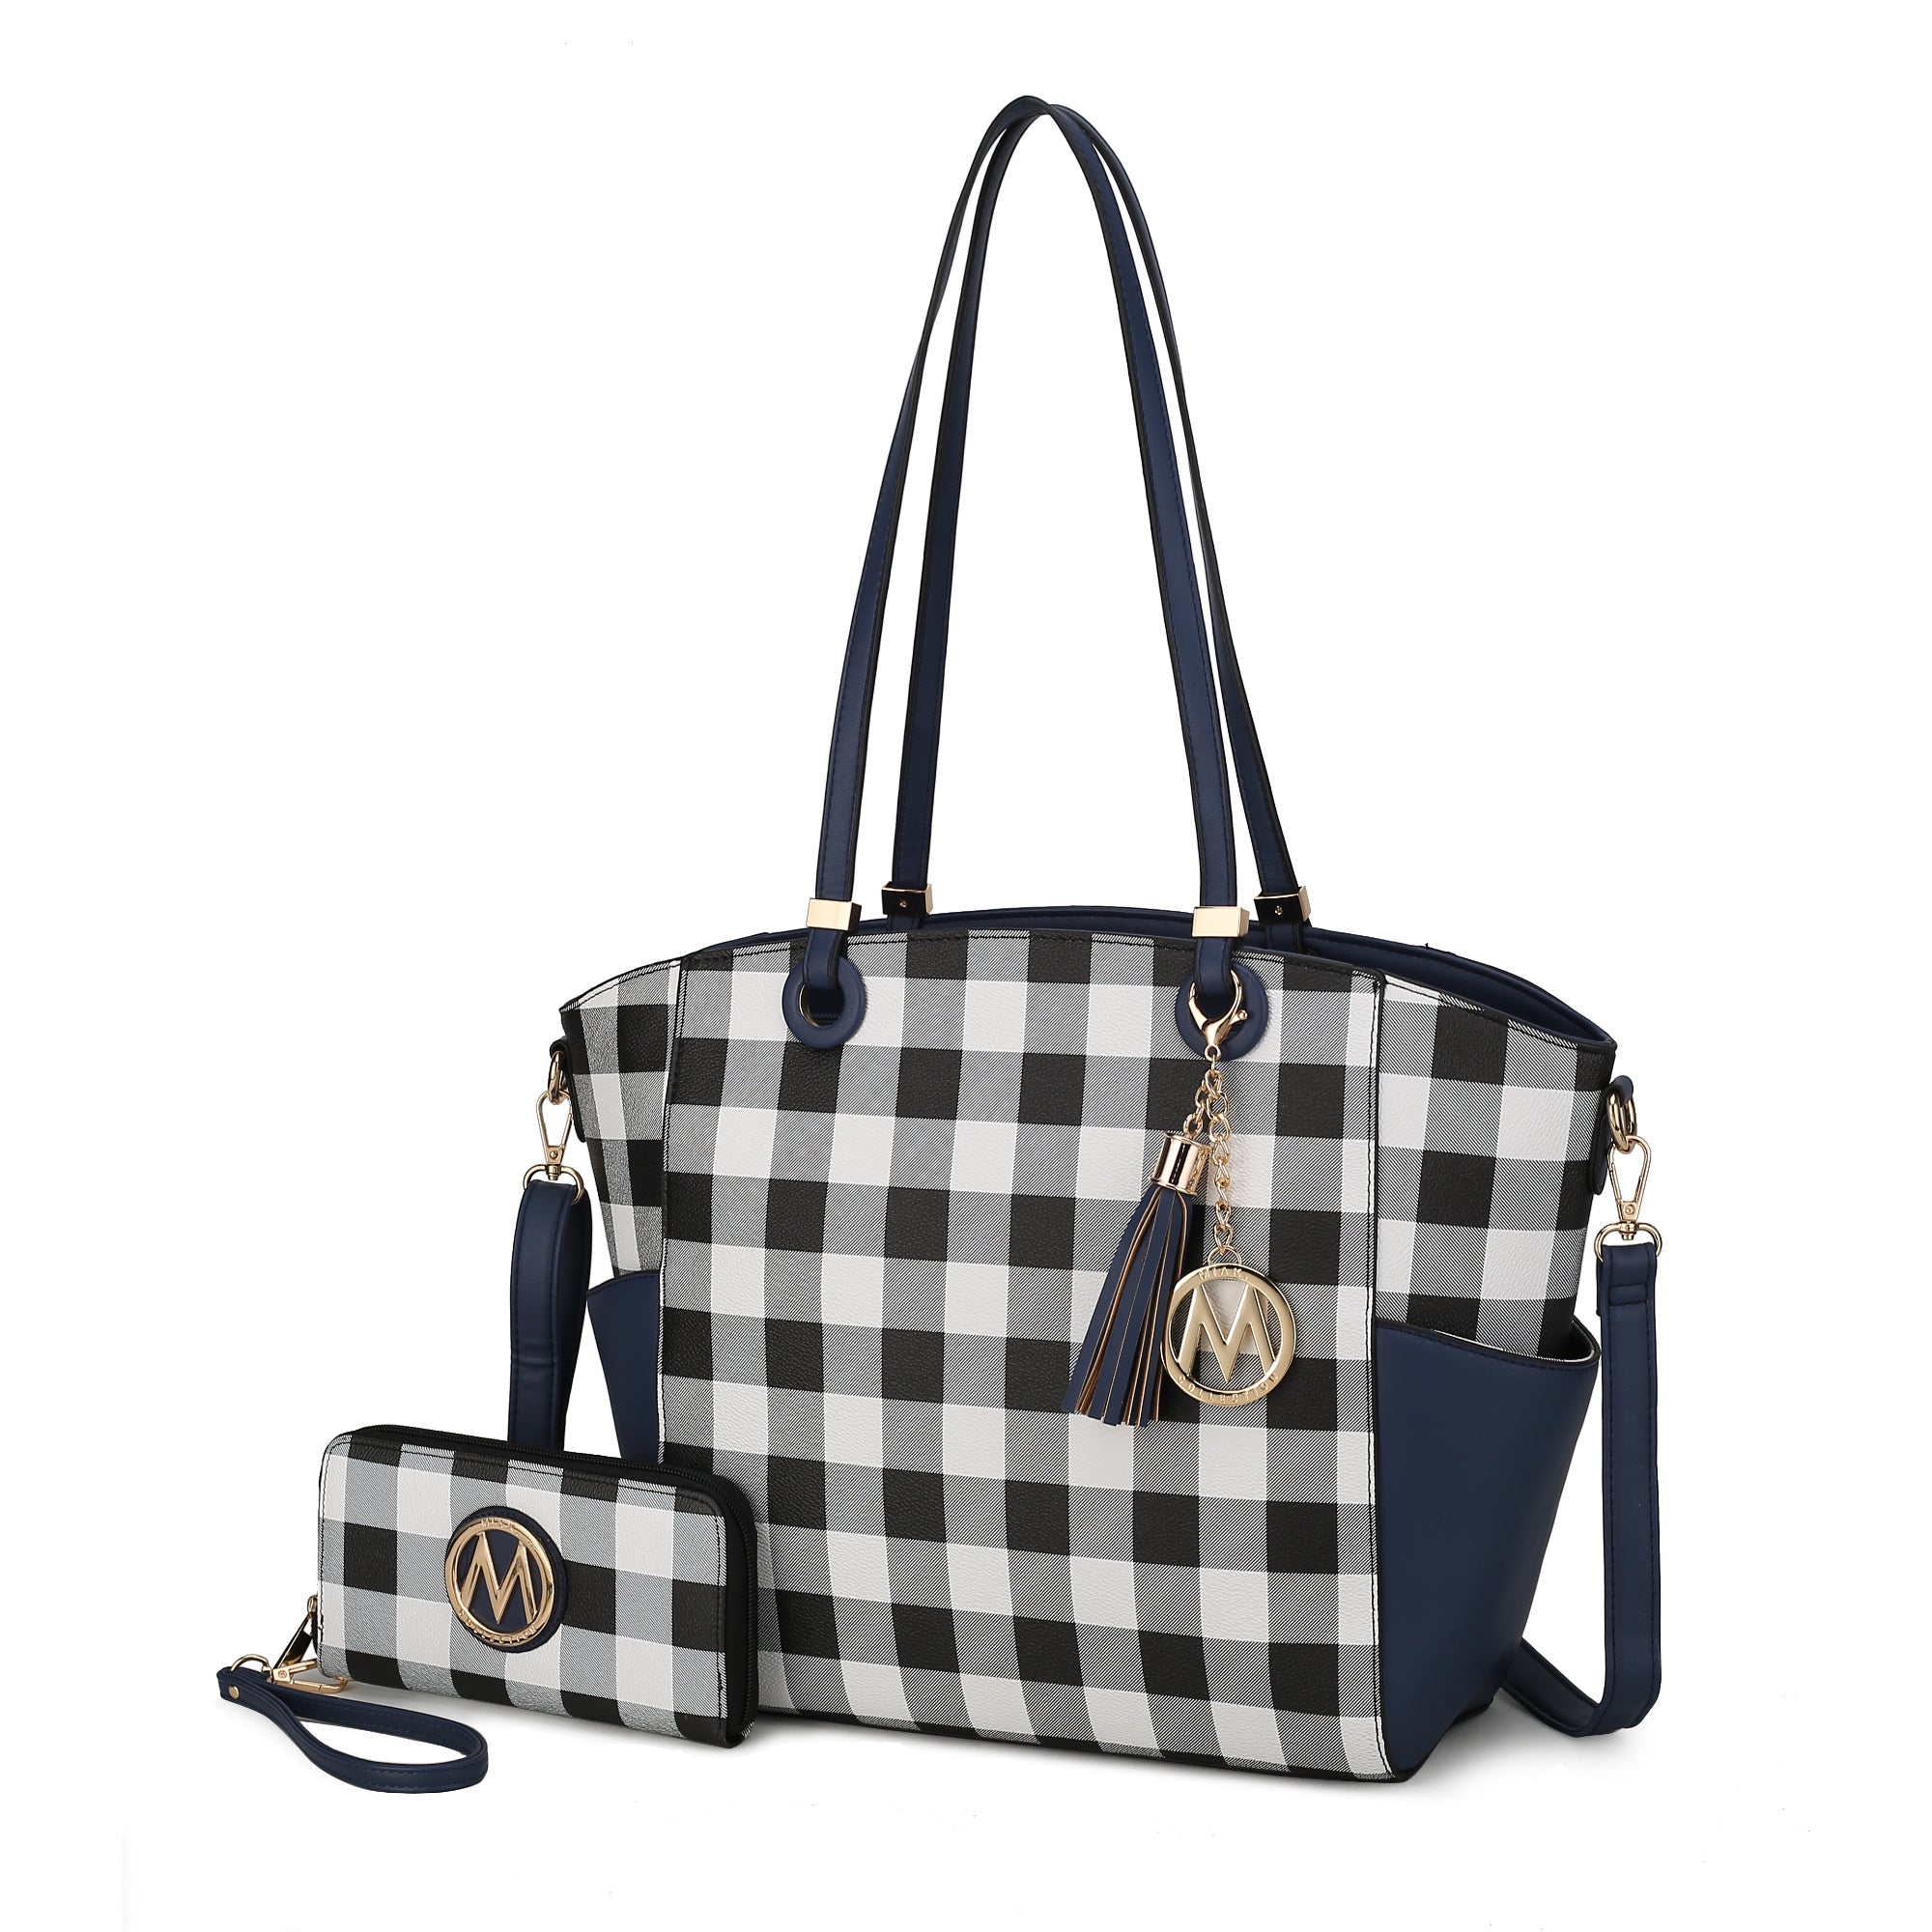 MKF Collection Karlie Tote Handbag with Wallet by Mia K